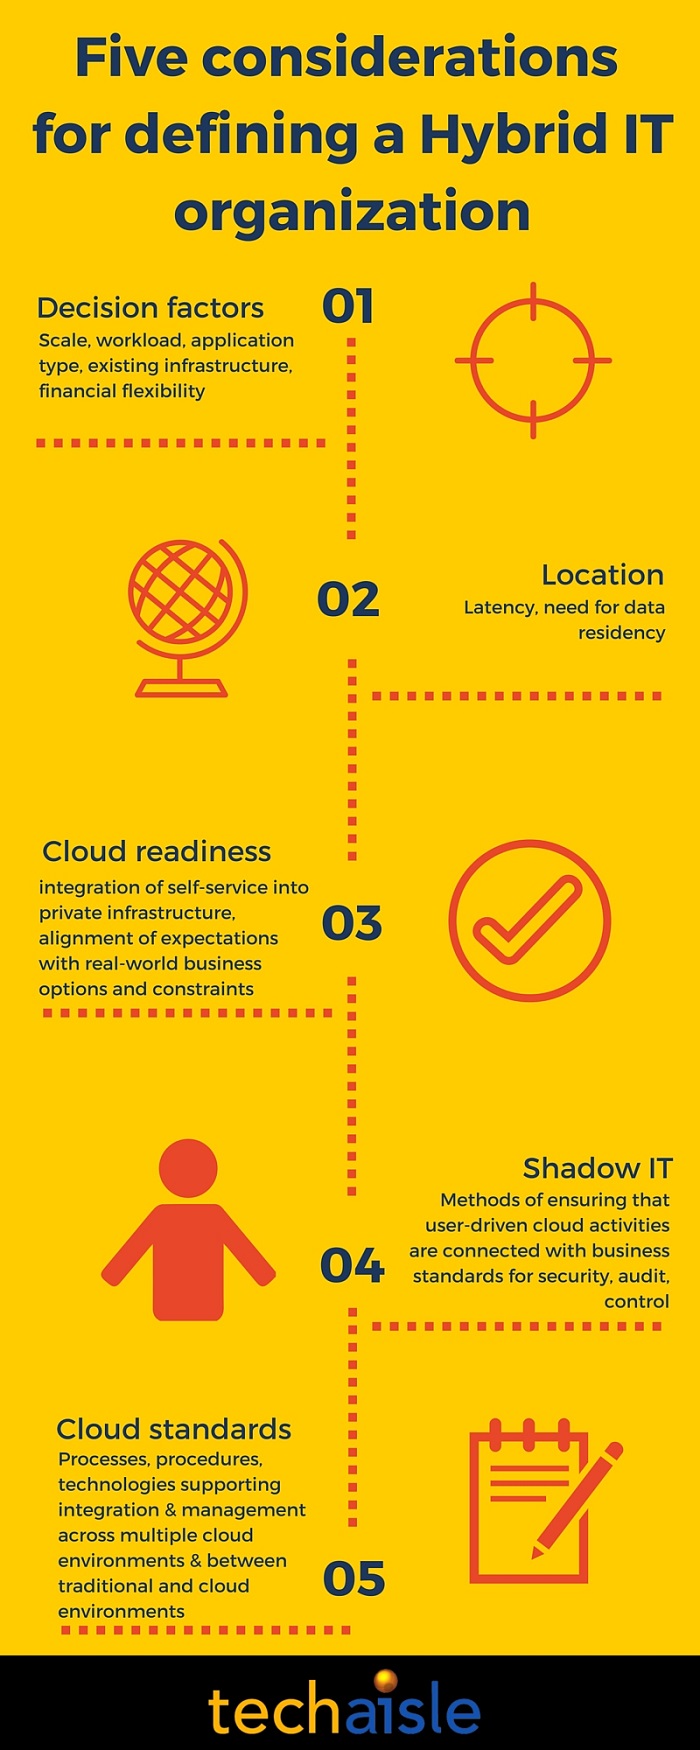 techaisle infographic 5 considerations for hybrid it low res